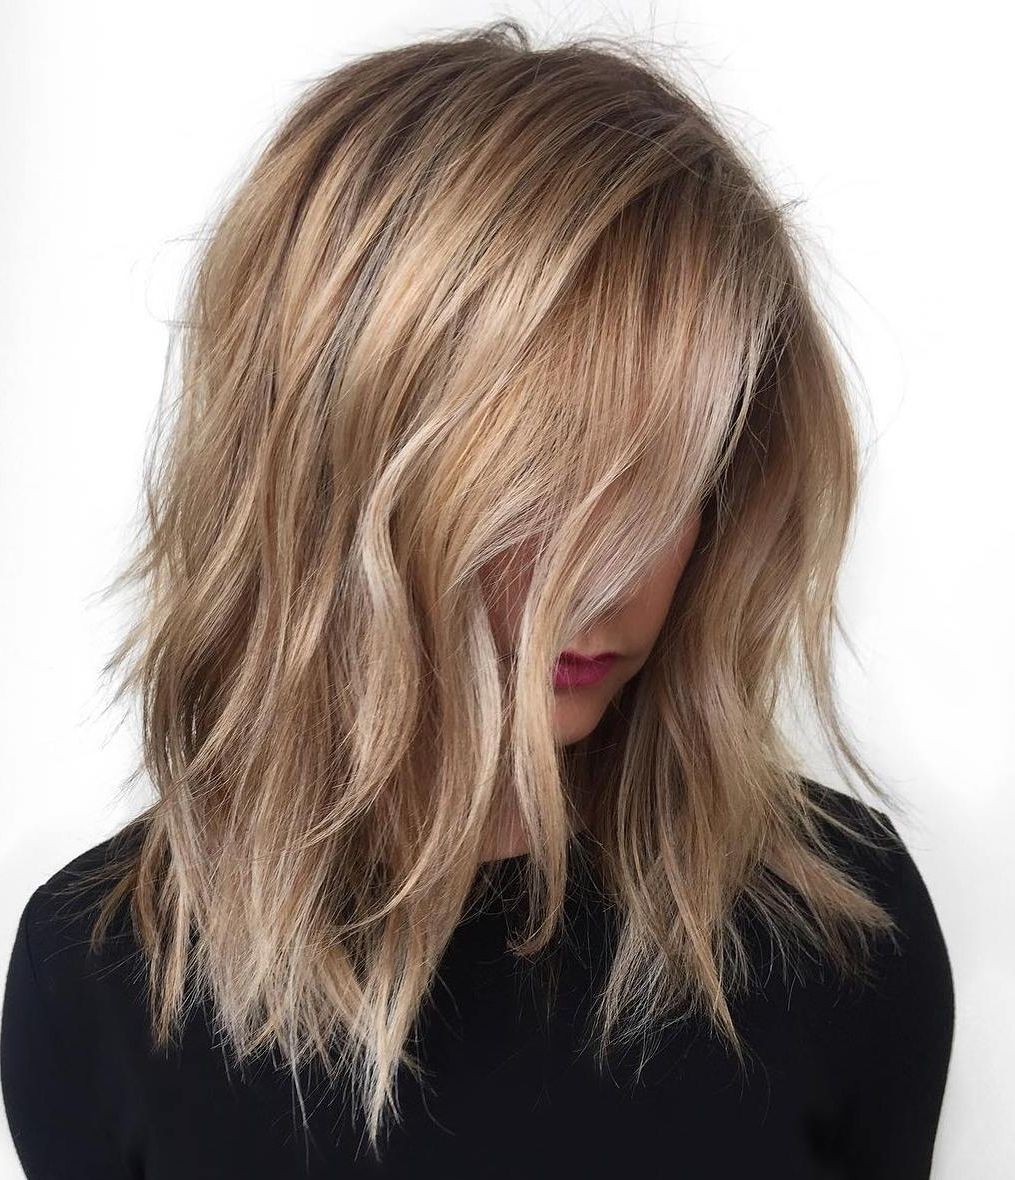 Newest Tousled Shoulder Length Waves Blonde Hairstyles Regarding 40 Styles With Medium Blonde Hair For Major Inspiration (View 15 of 20)